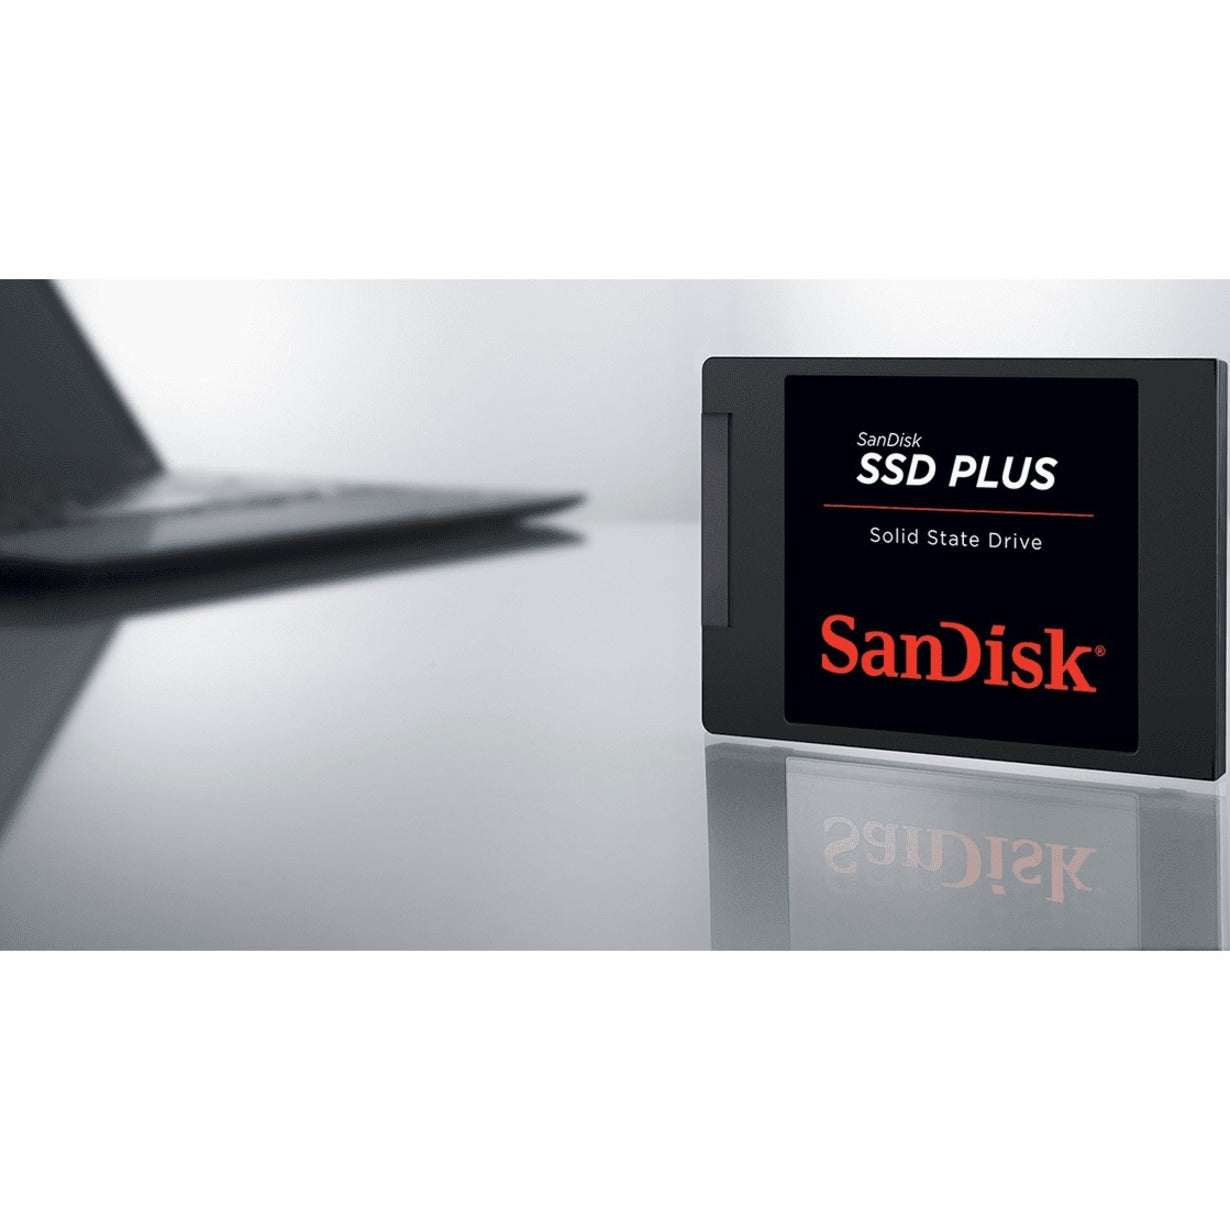 SanDisk SDSSDA-2T00-G26 SSD PLUS 2 TB Solid State Drive, Faster Performance and Reliable Storage